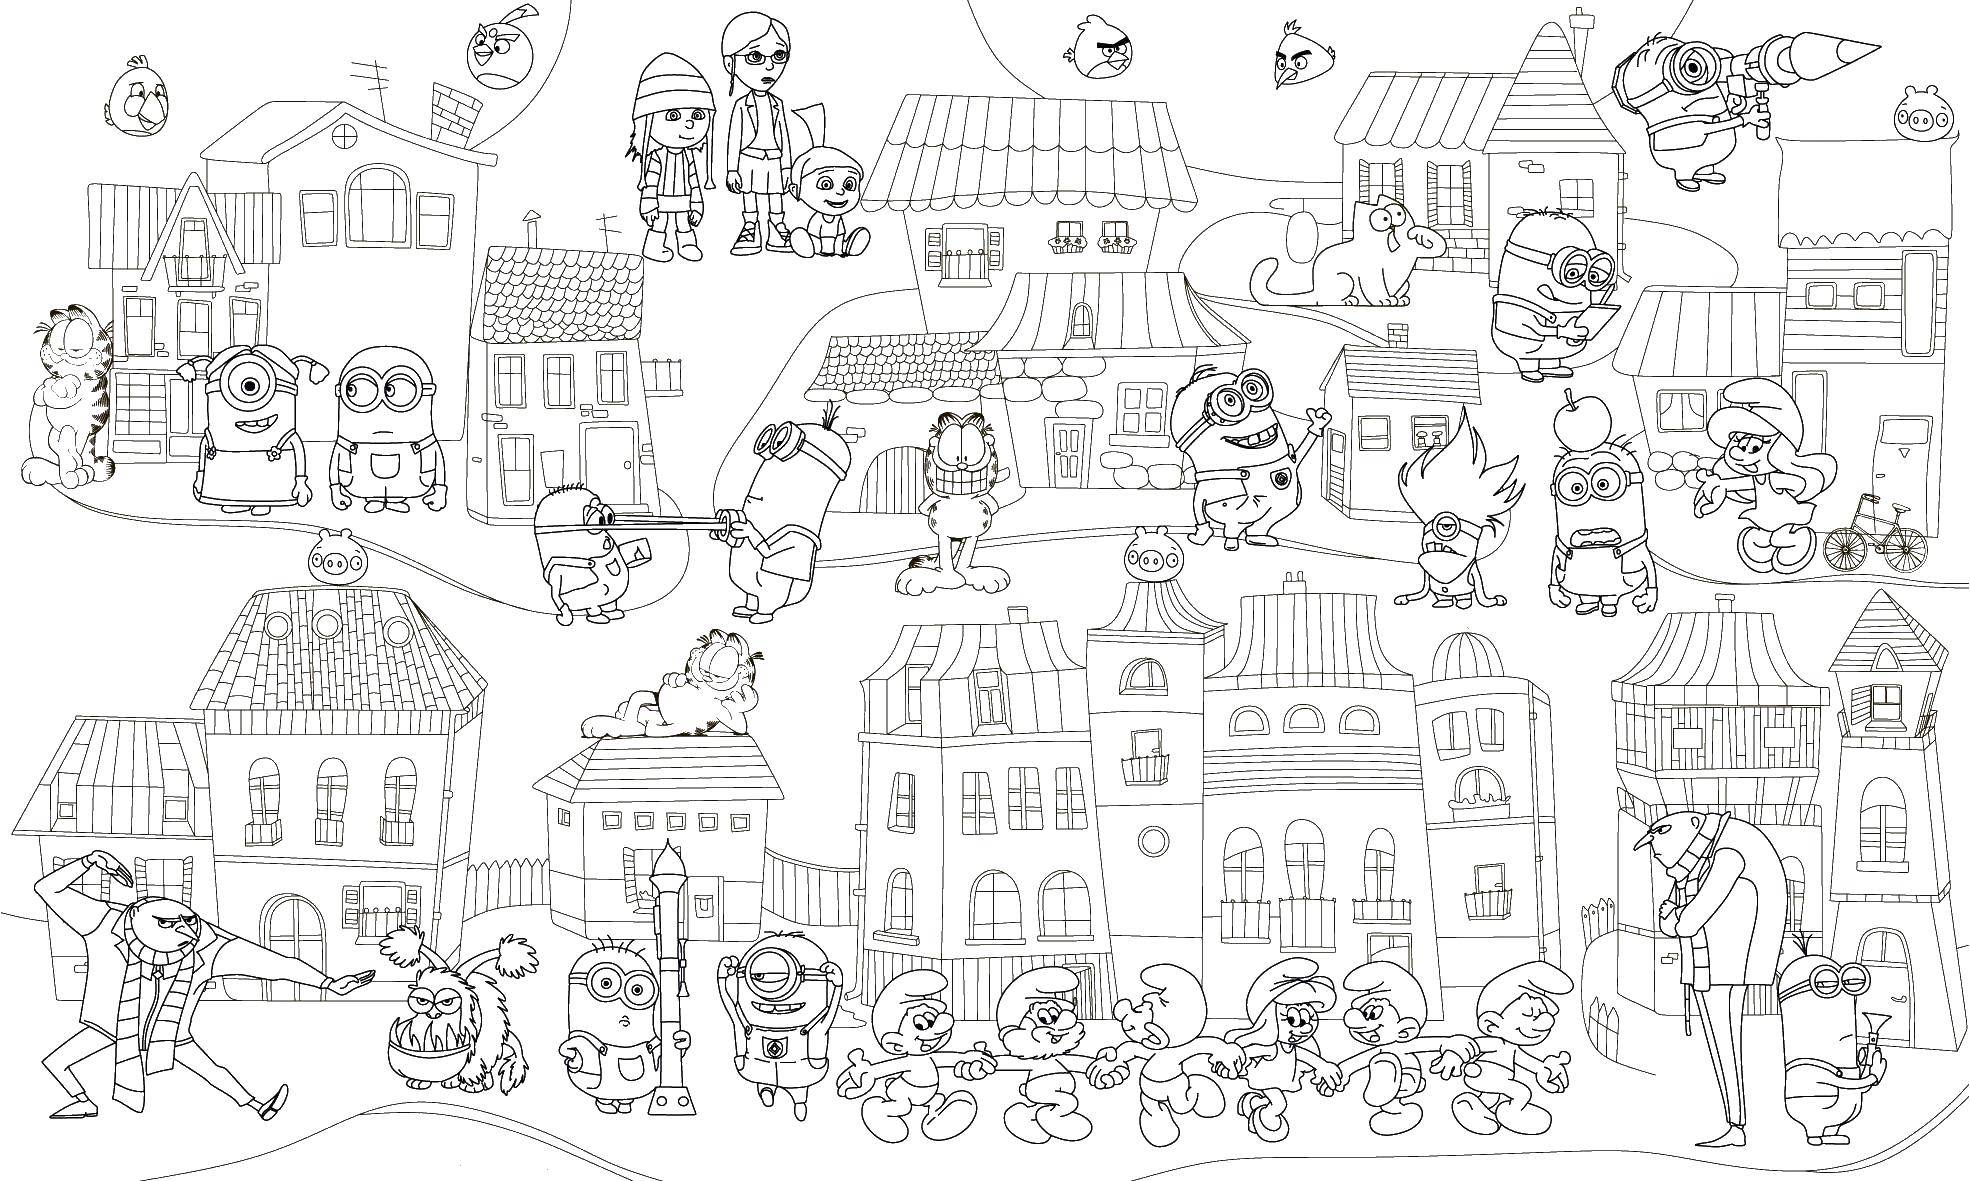 Coloring City of minions. Category the minions. Tags:  the minions.